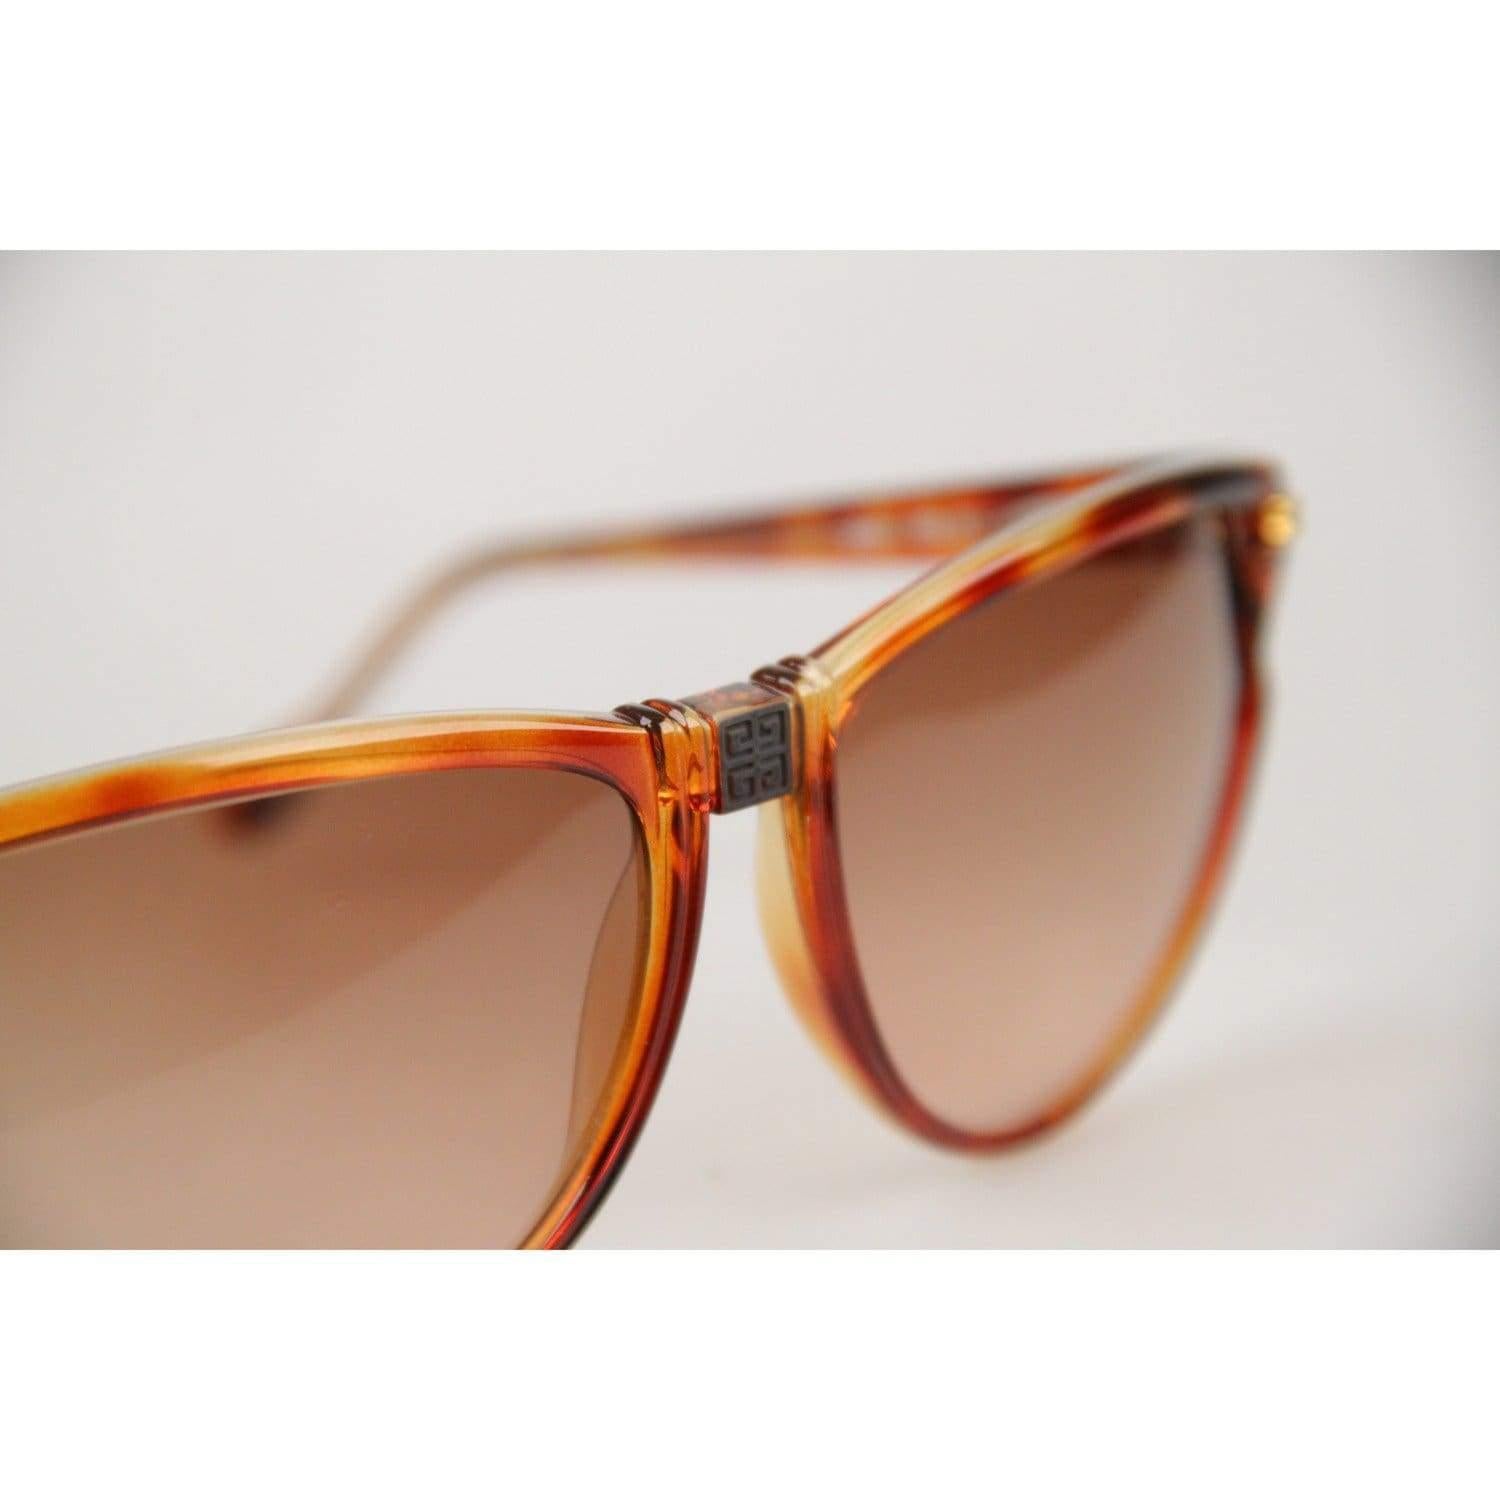 Givenchy Vintage Brown Sunglasses SG01 COL 02 4